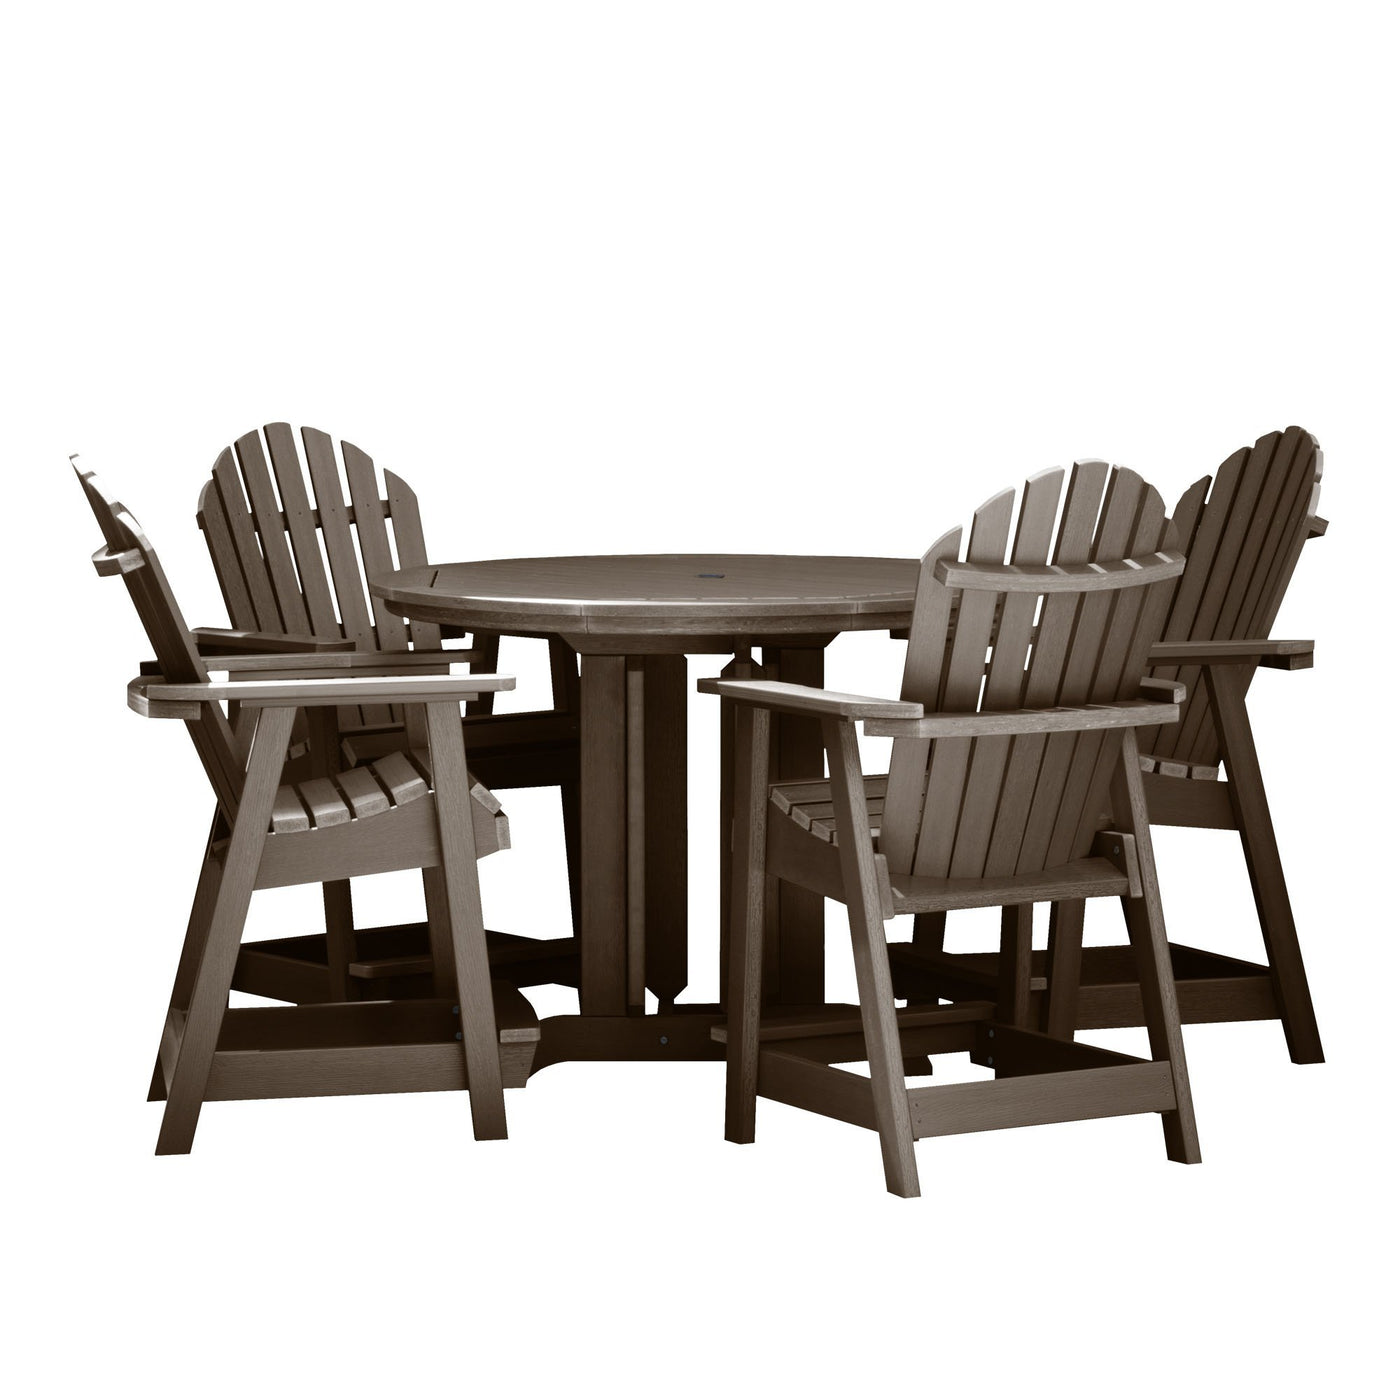 Hamilton 5pc 48in Round Dining Set - Counter Height Dining Highwood USA Weathered Acorn 